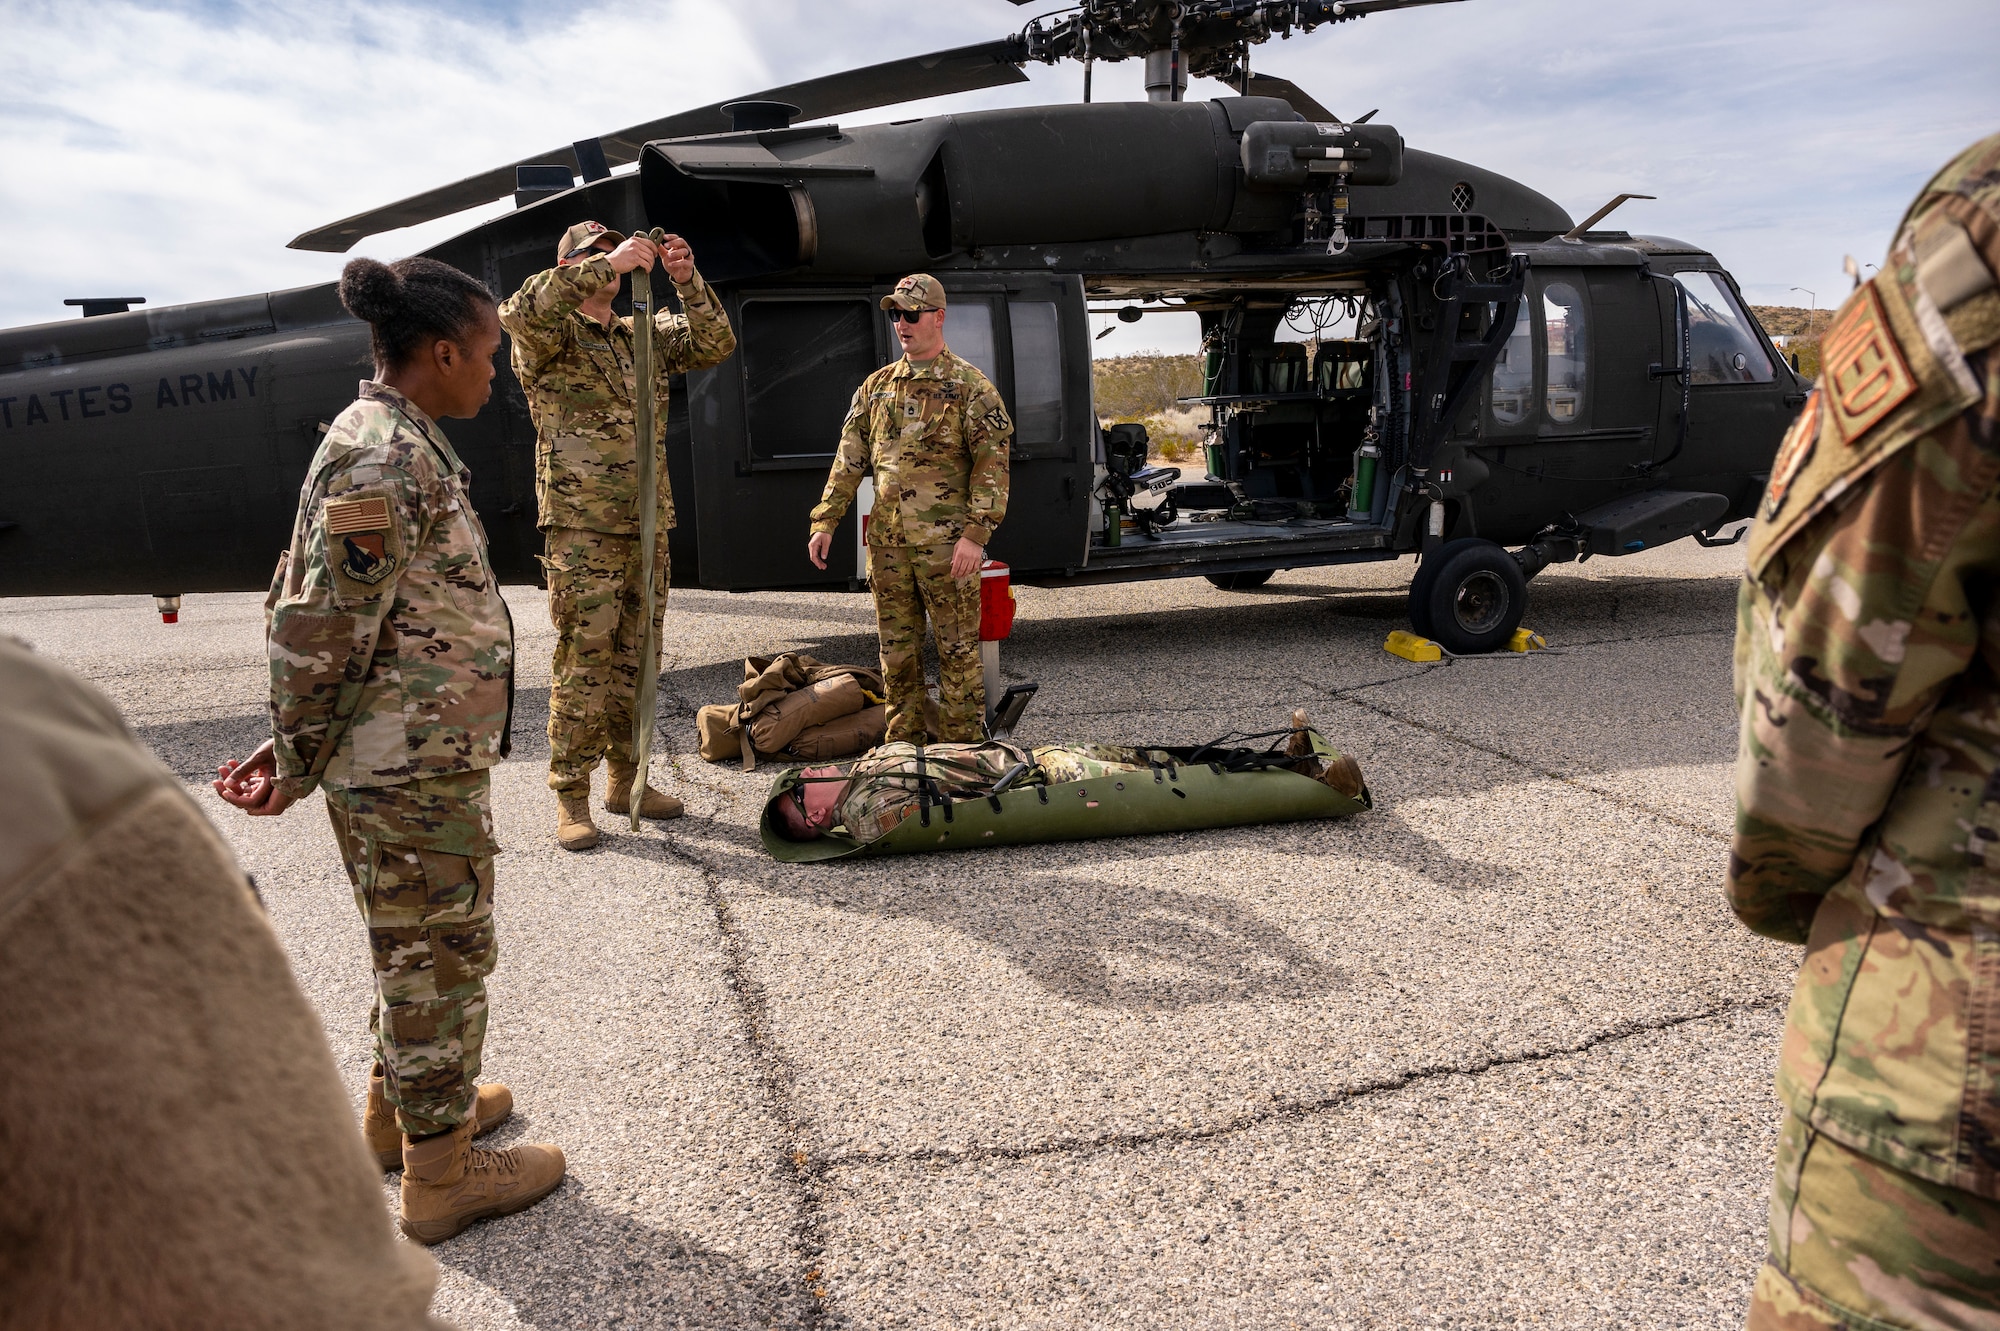 Soldiers from C Comapny, 2916th Aviation Battalion, 916th Support Brigade and Airmen from the 412th Medical Group, conduct medevac training at Edwards Air Force Base, California, March 3. (Air Force photo by Katherine Franco)